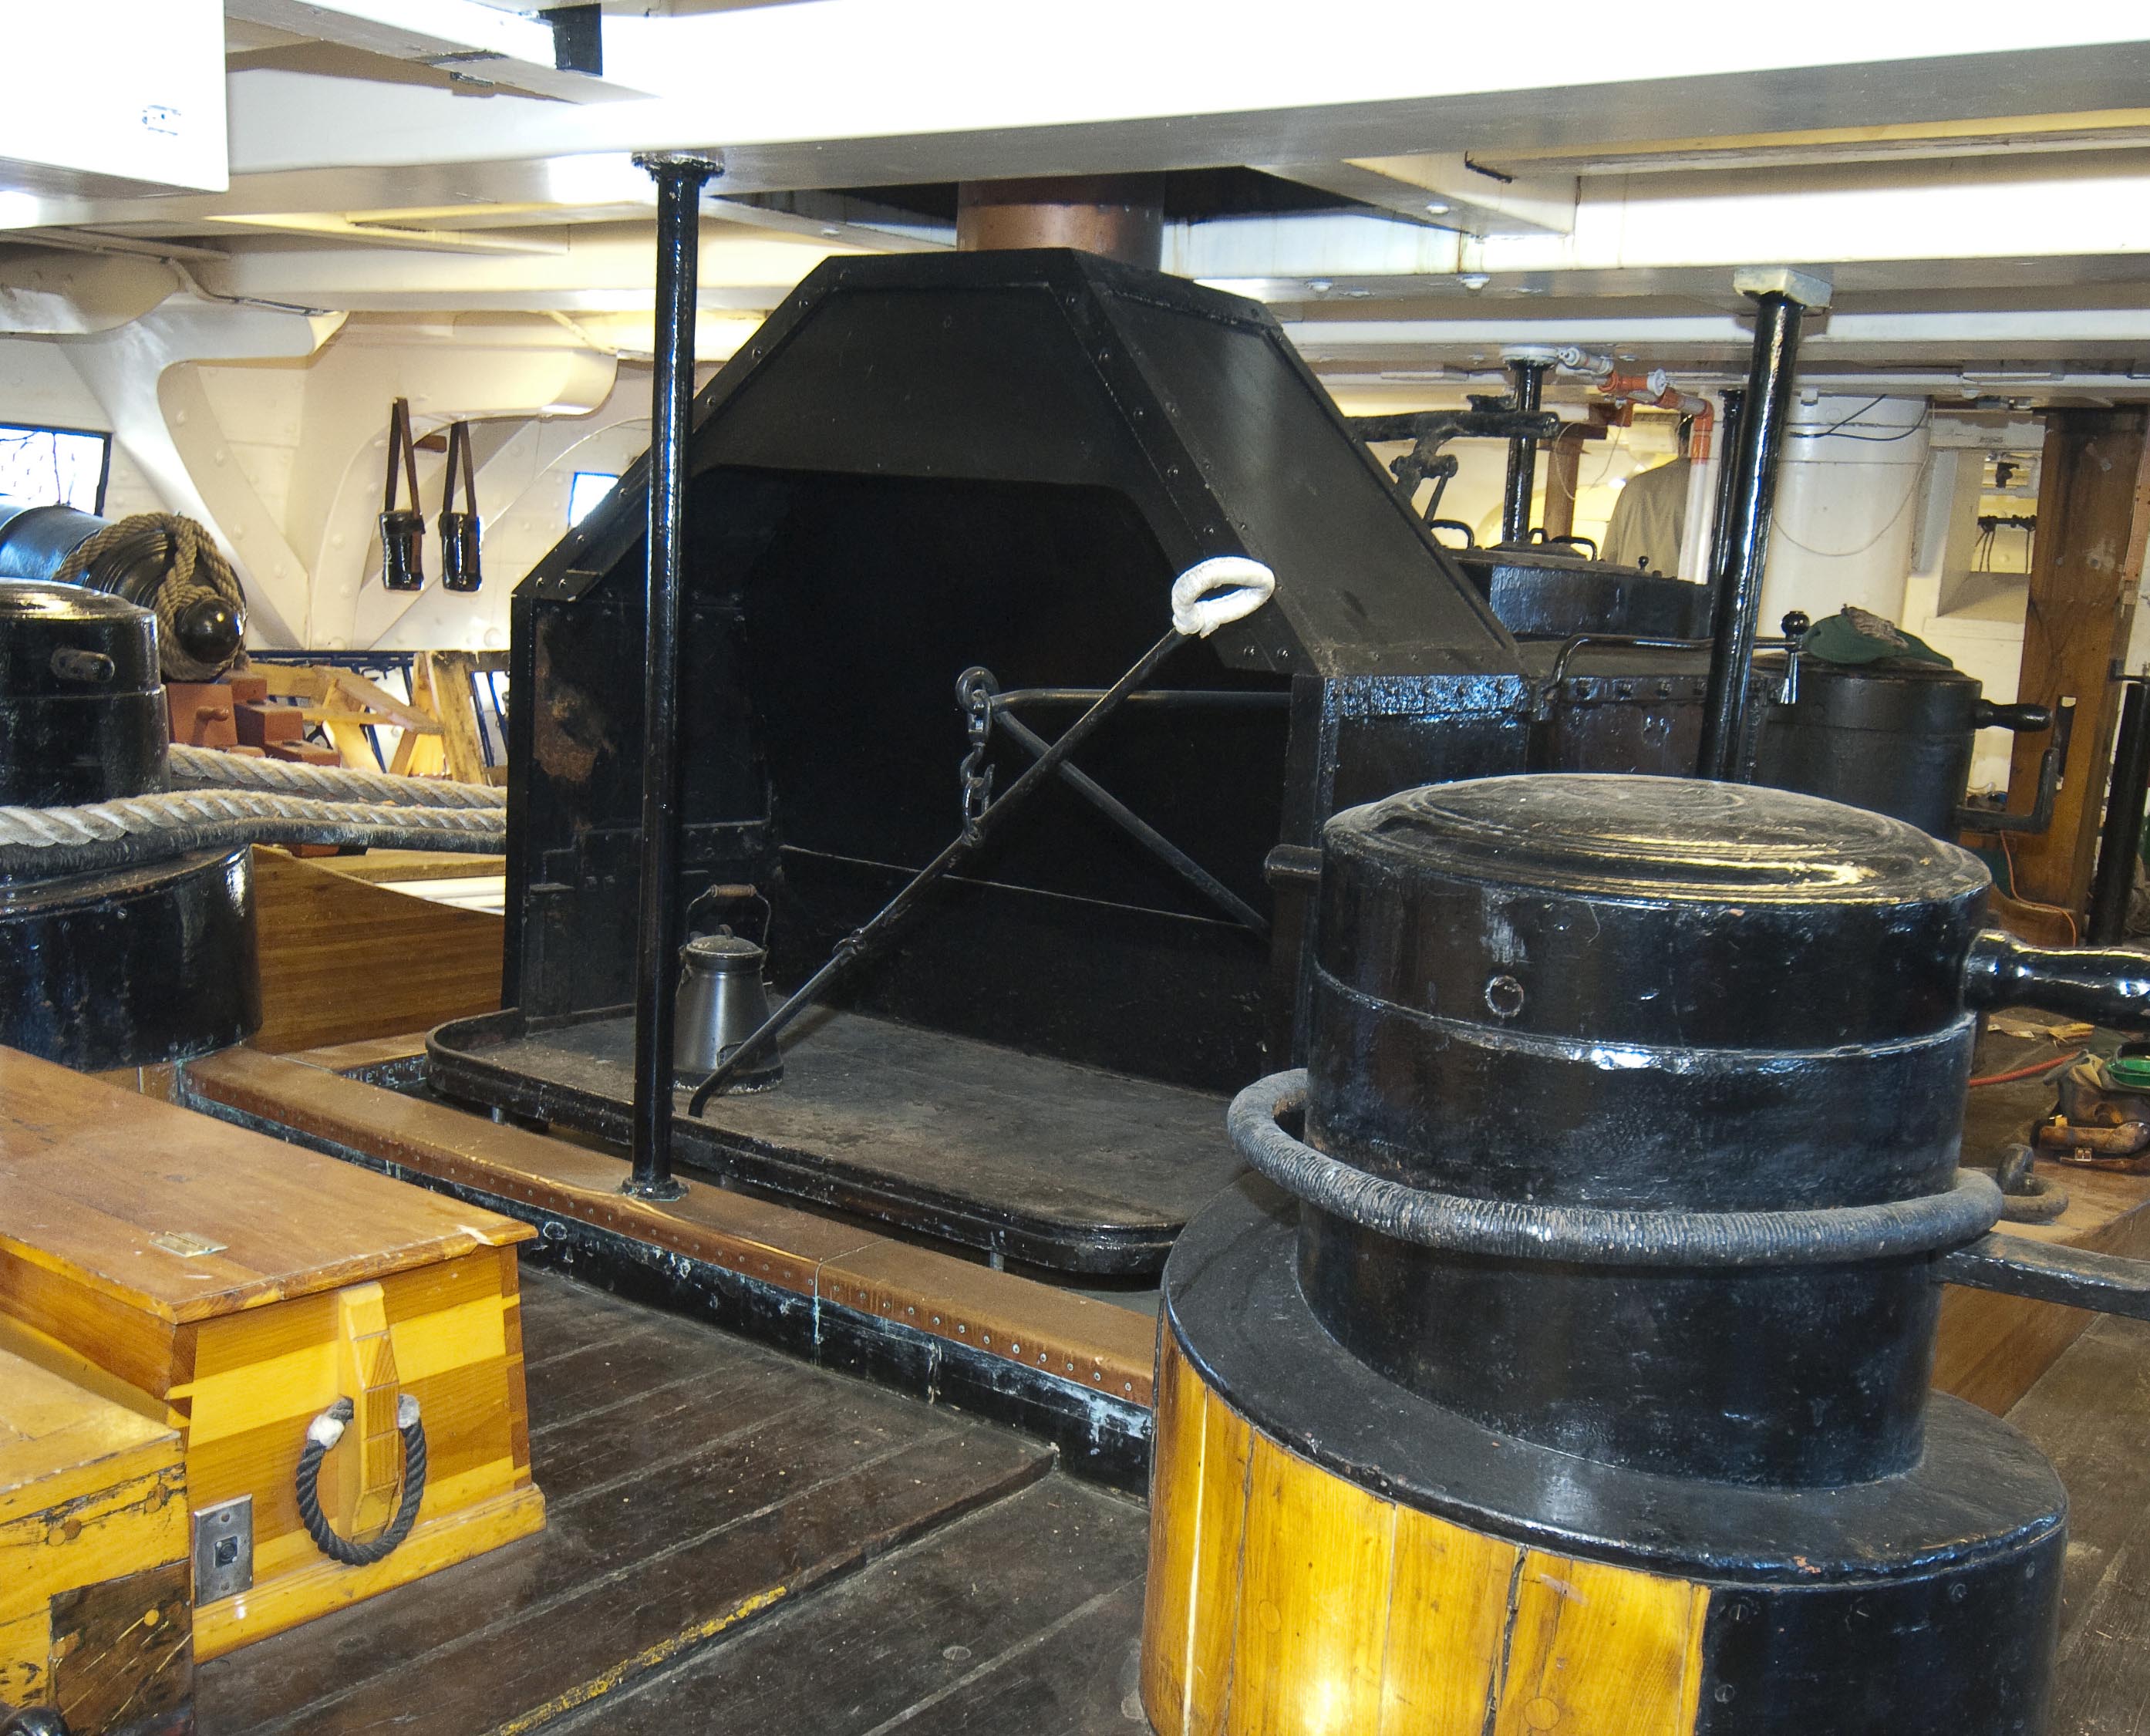 "Hearth" end of Constitution's late-19th century galley stove. [Courtesy Naval History & Heritage Command Detachment Boston]